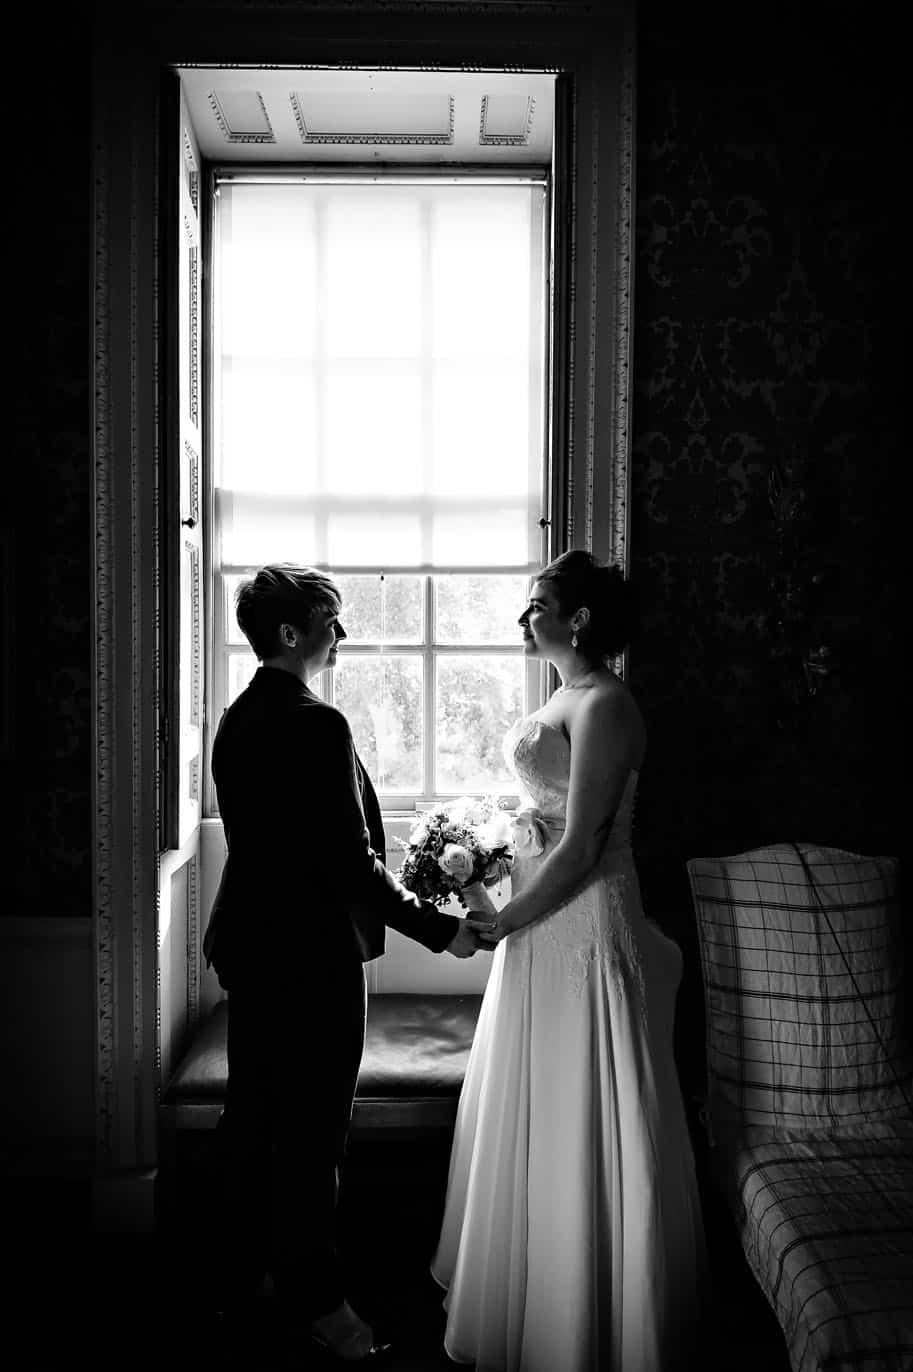 Black and White LGBT/Gay Wedding Photography - Female Couple Holding Hands In Front of Window